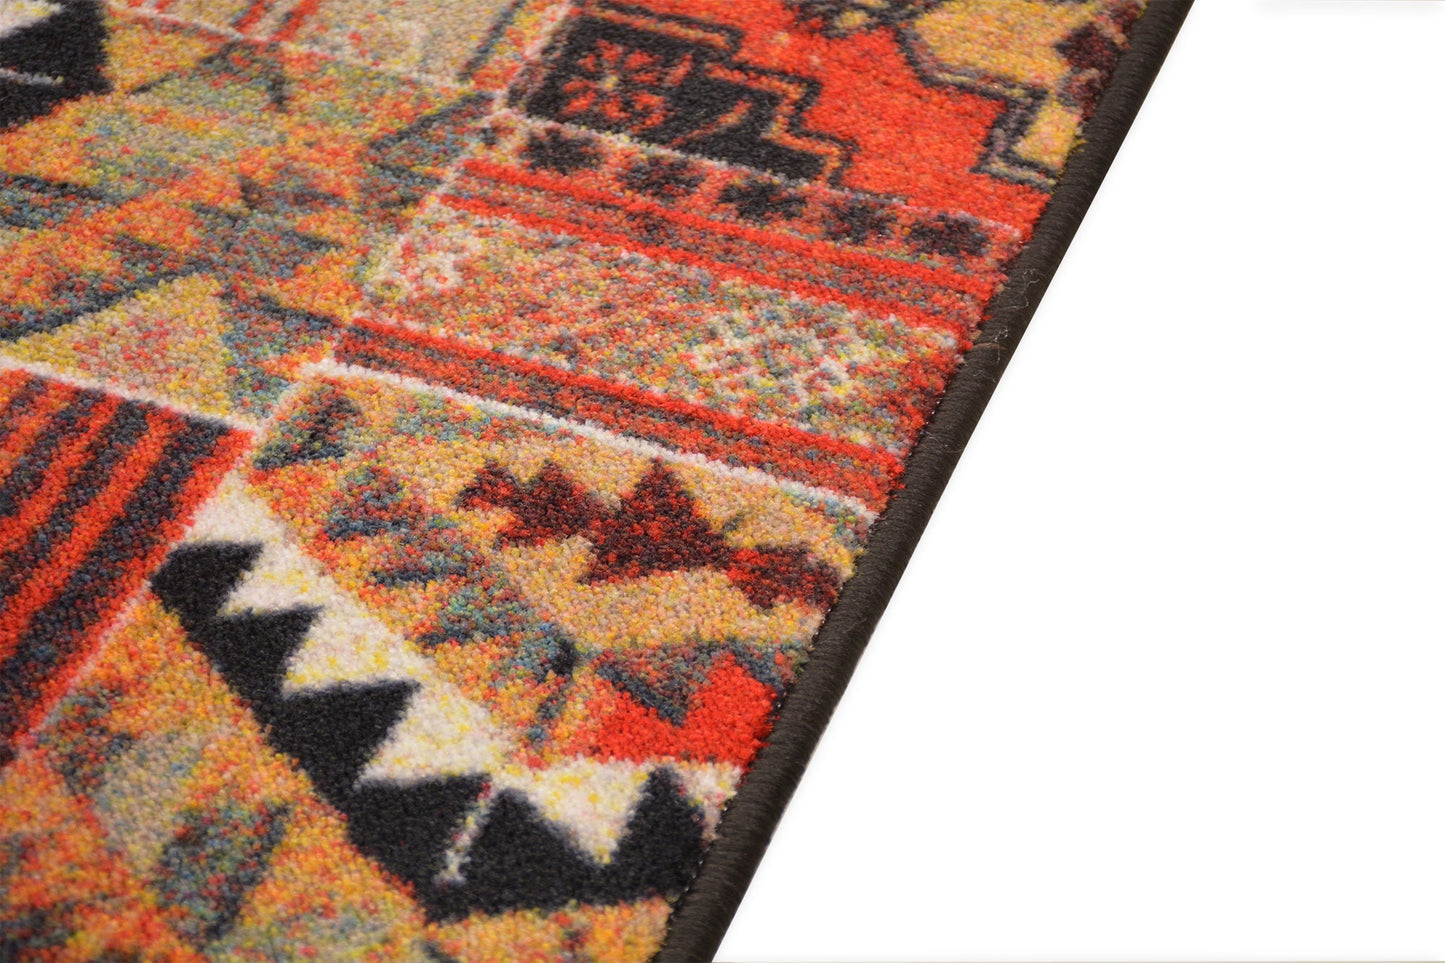 Custom Size Runner Rug Antique Patchwork Kilim Design Natural Cotton Backing Pick Your Own Size By Up to 50 Ft Length, 26", 35" Width